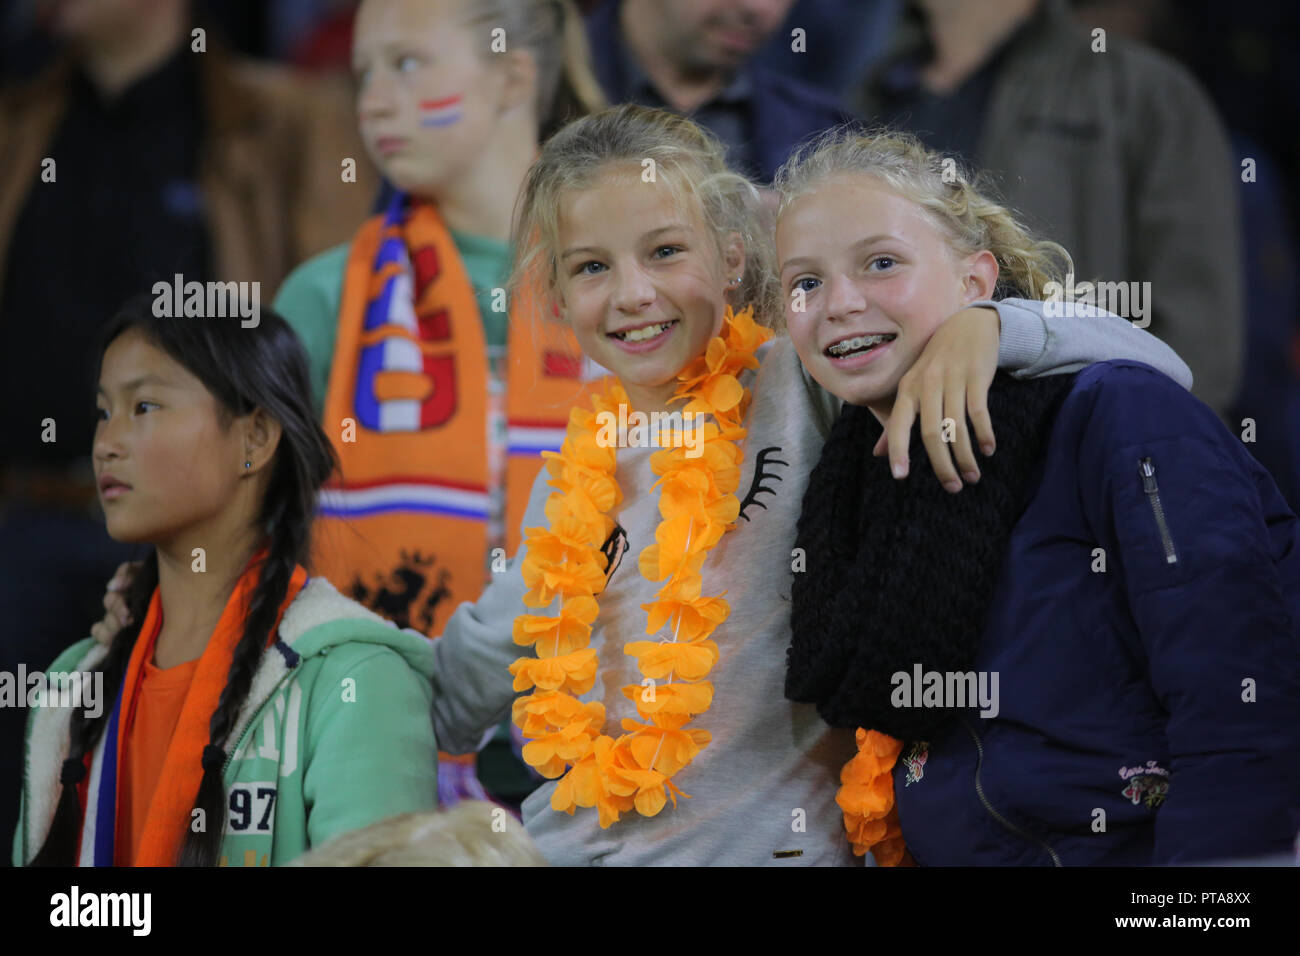 Football fans of Netherlands watch the match agains Denmark for qualification to the world cup. Stock Photo